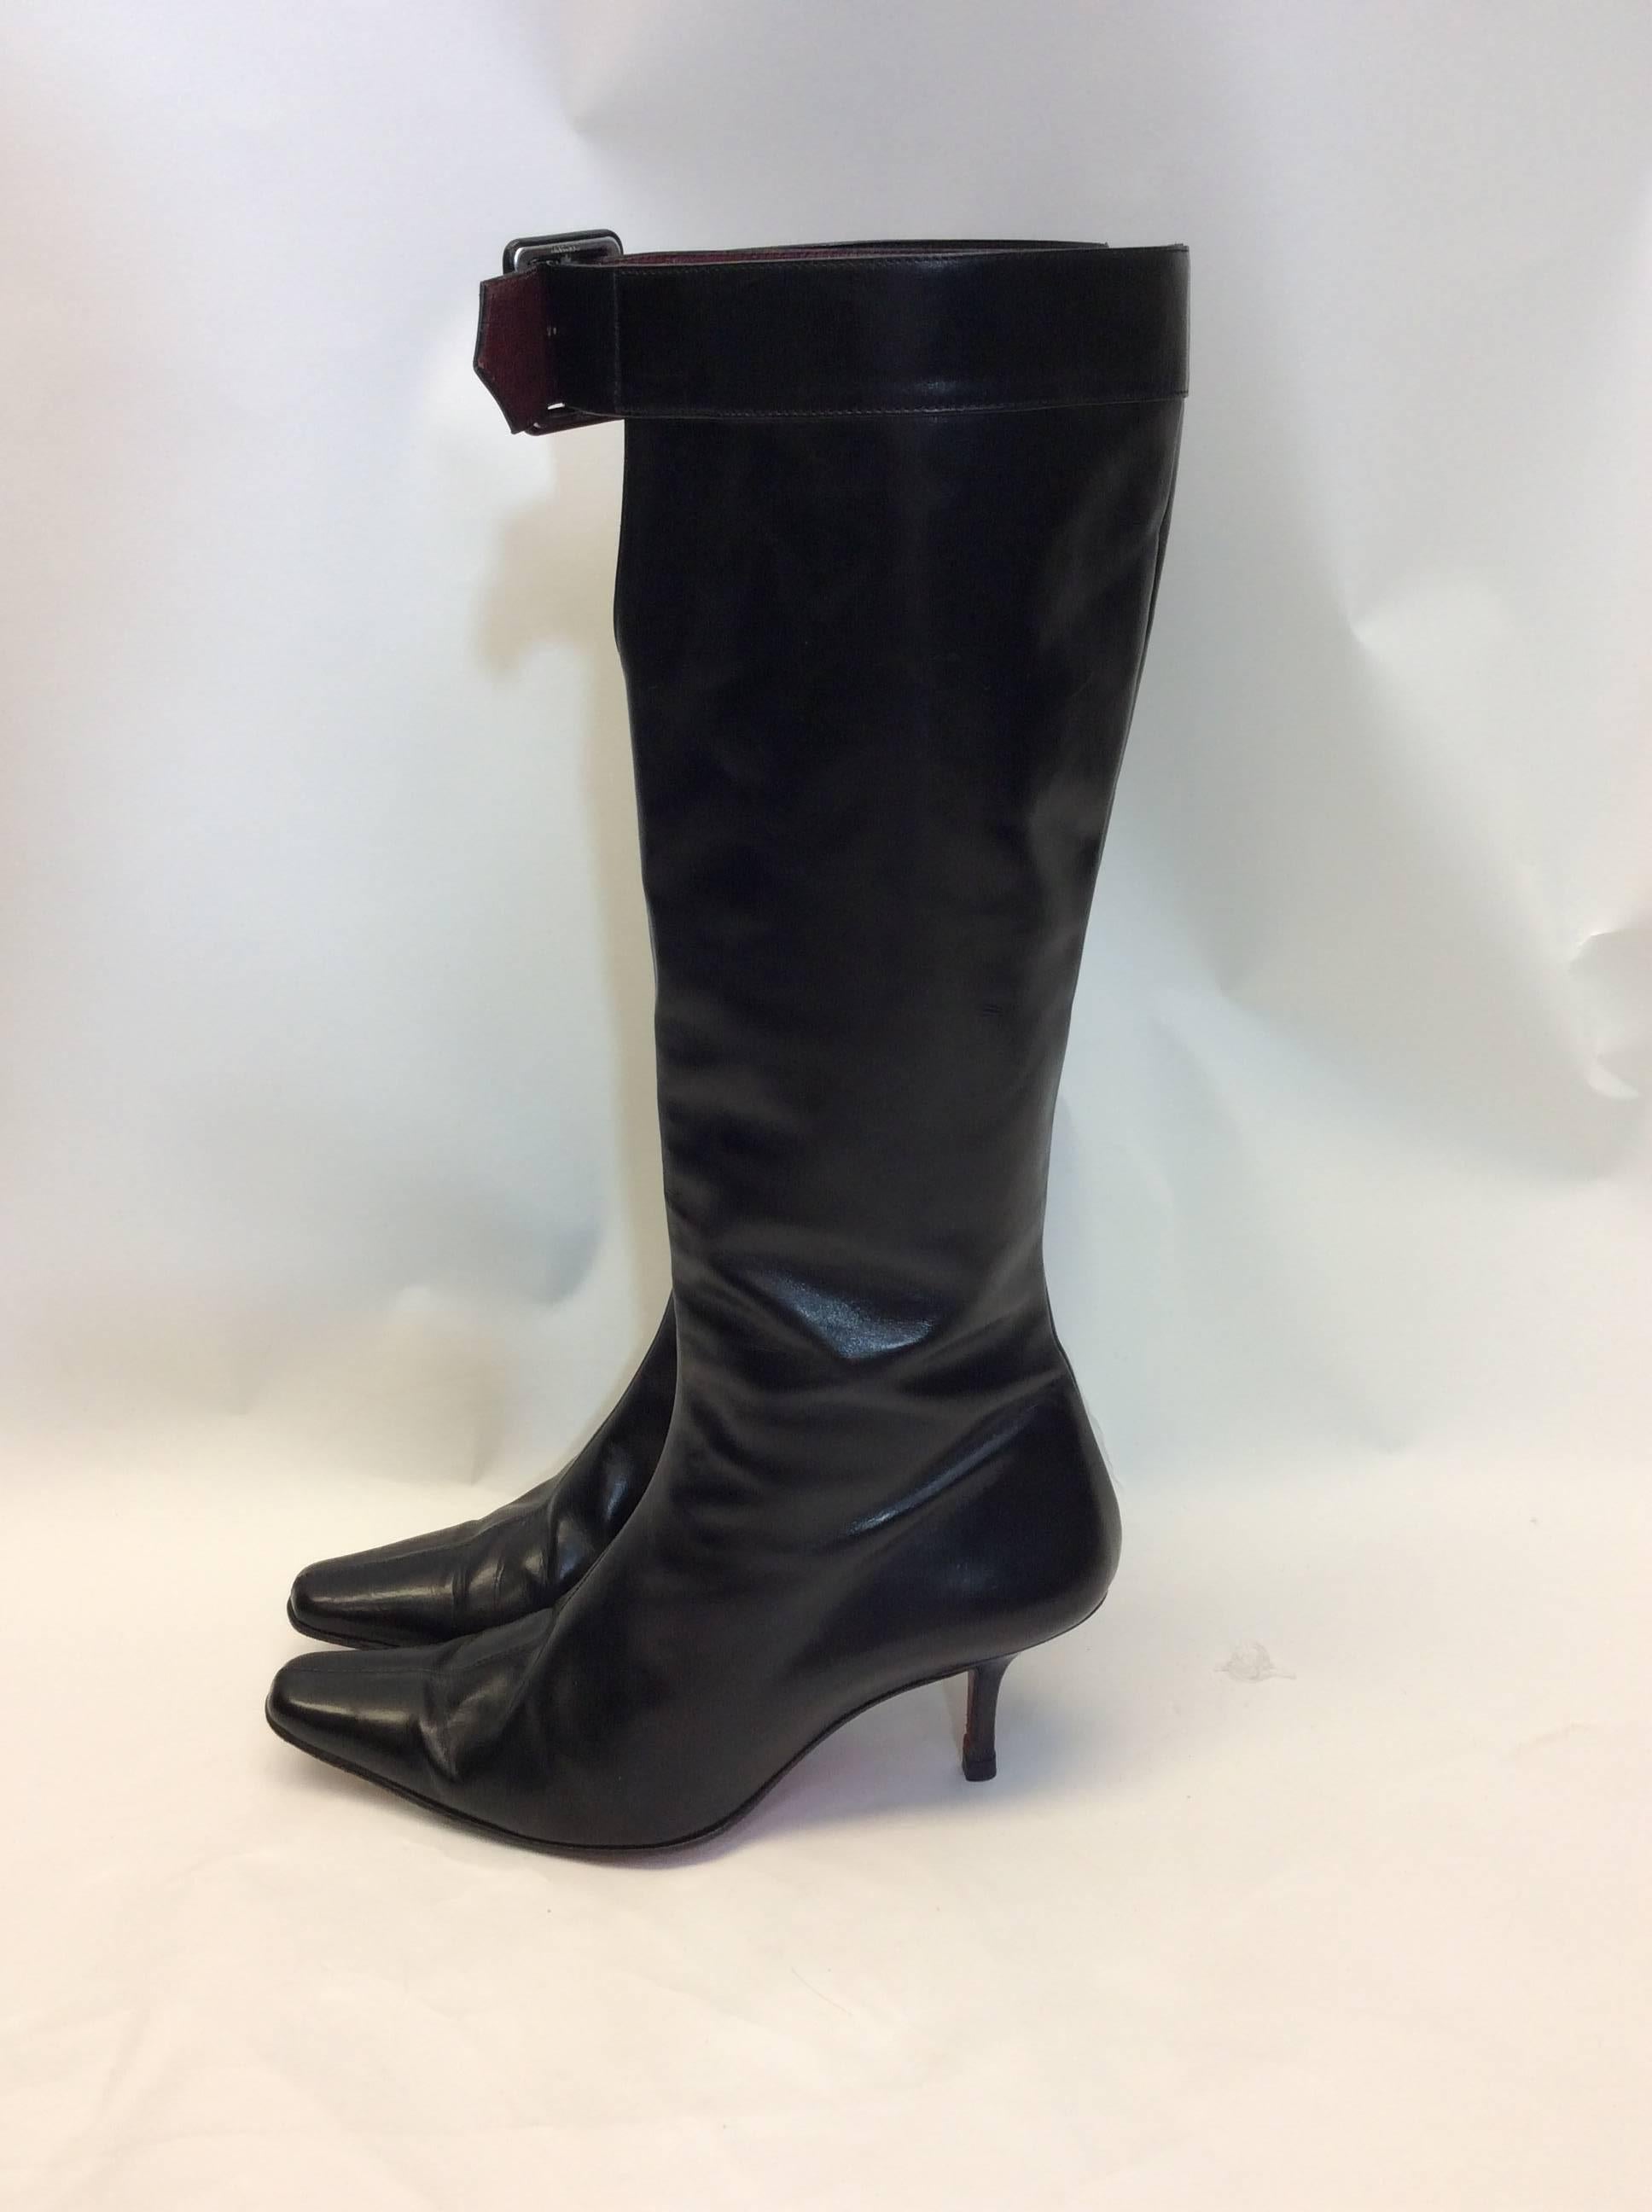 Christian Louboutin Black Leather Buckle Boots
$250
Size 36.5
2.5 inch heel size zipper and top front buckle 
Made in Italy
**signs of wear on heels, see photo